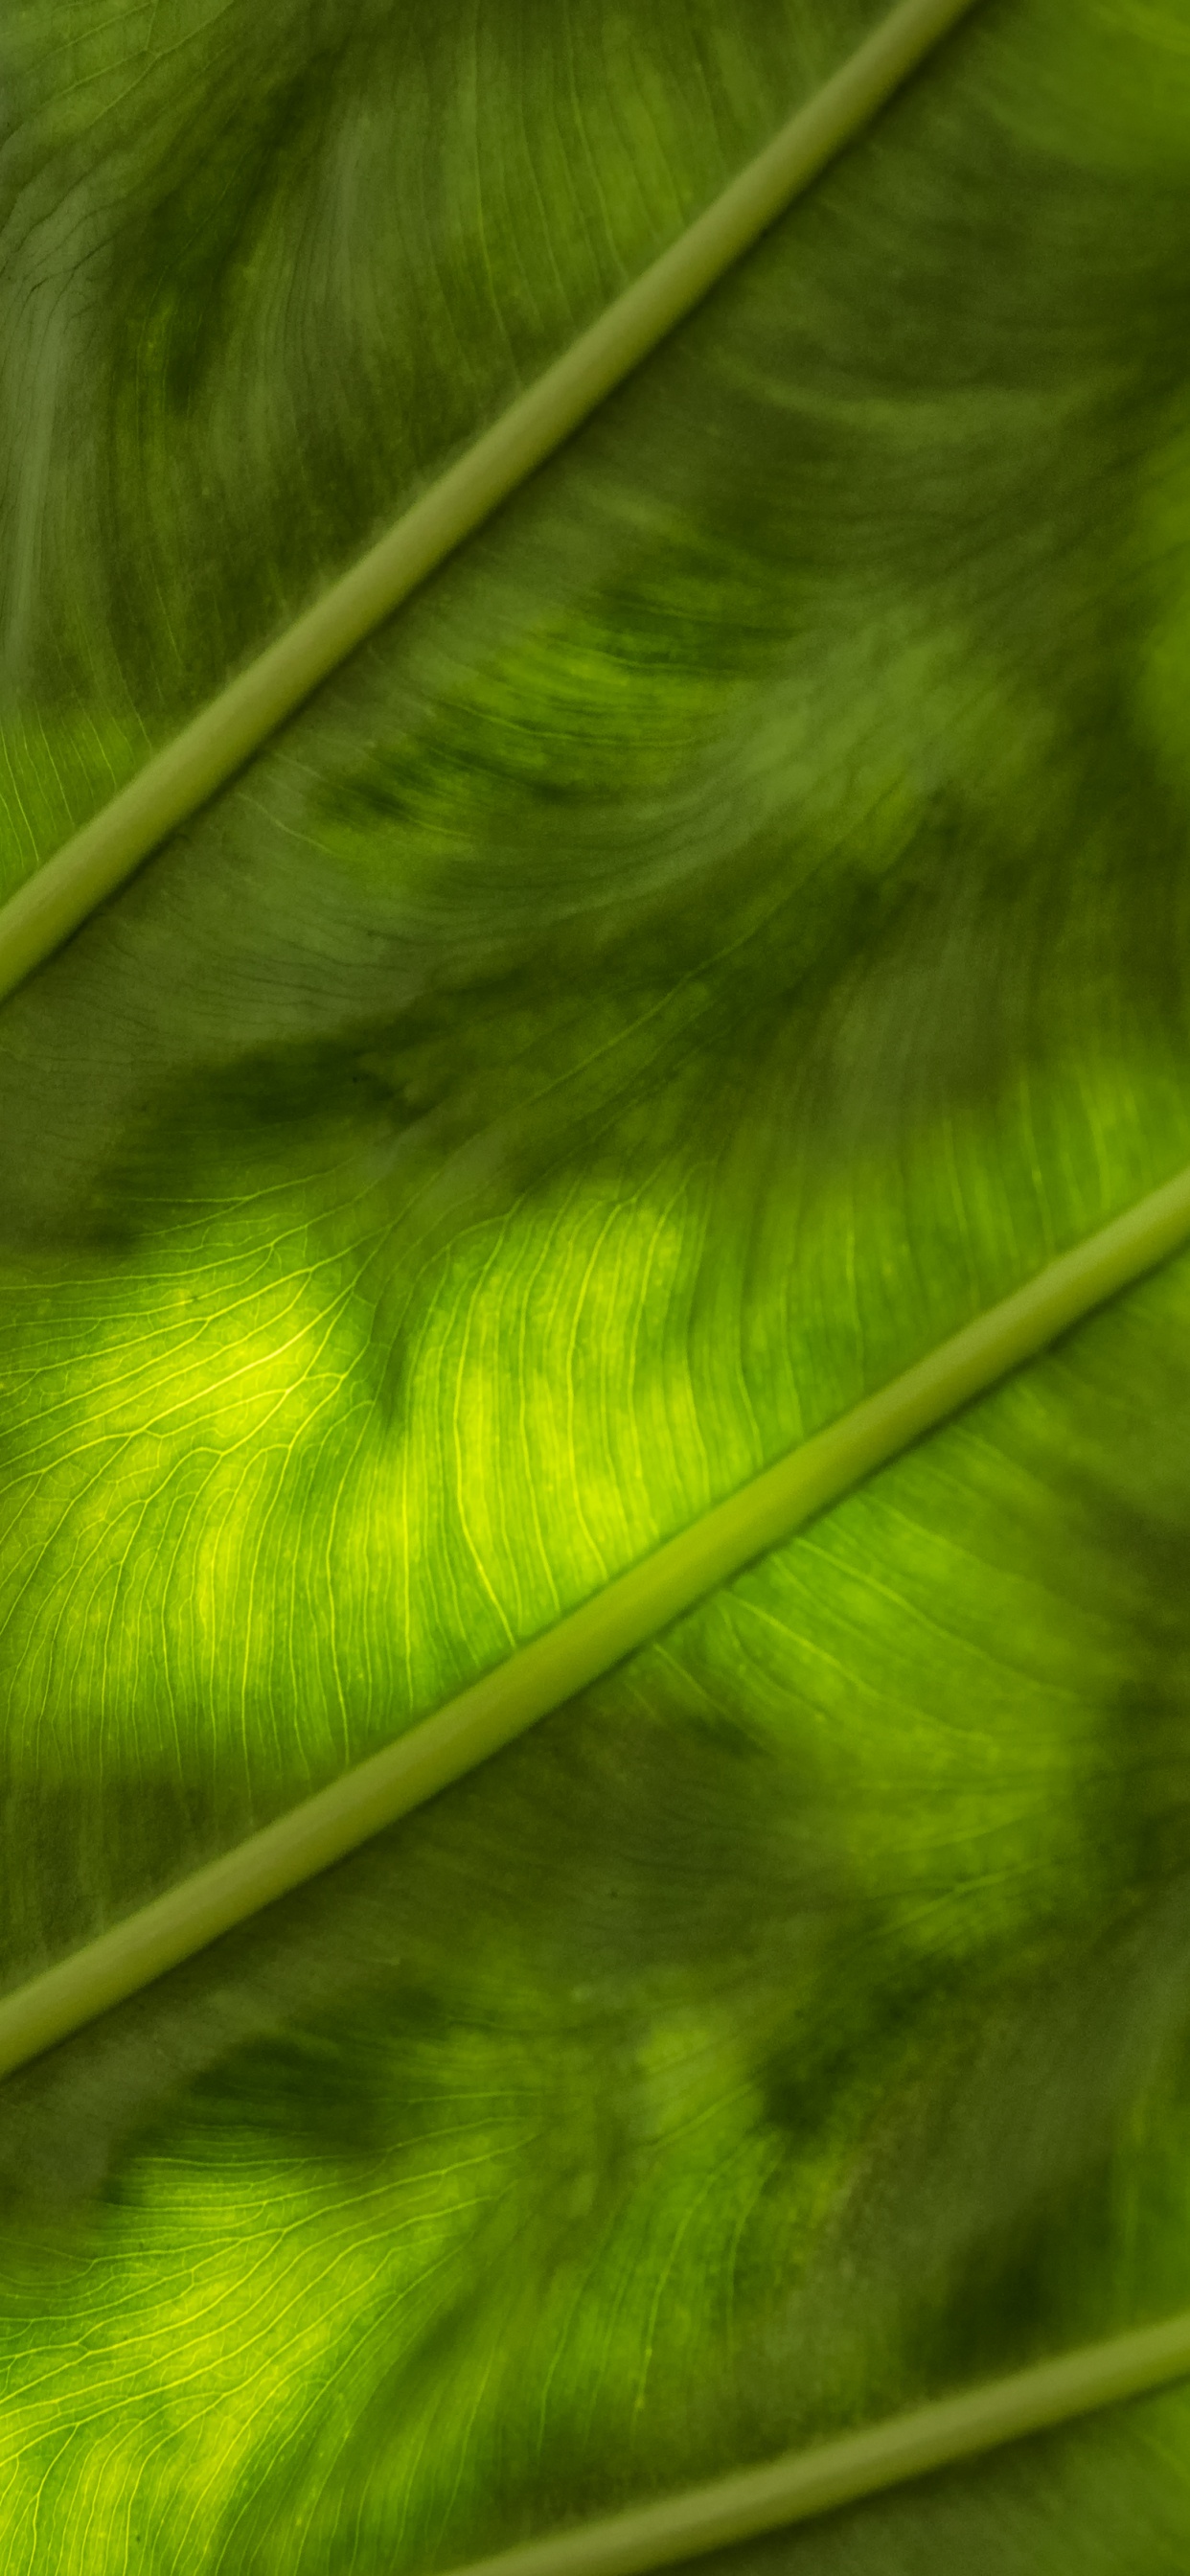 Green and White Stripe Textile. Wallpaper in 1242x2688 Resolution